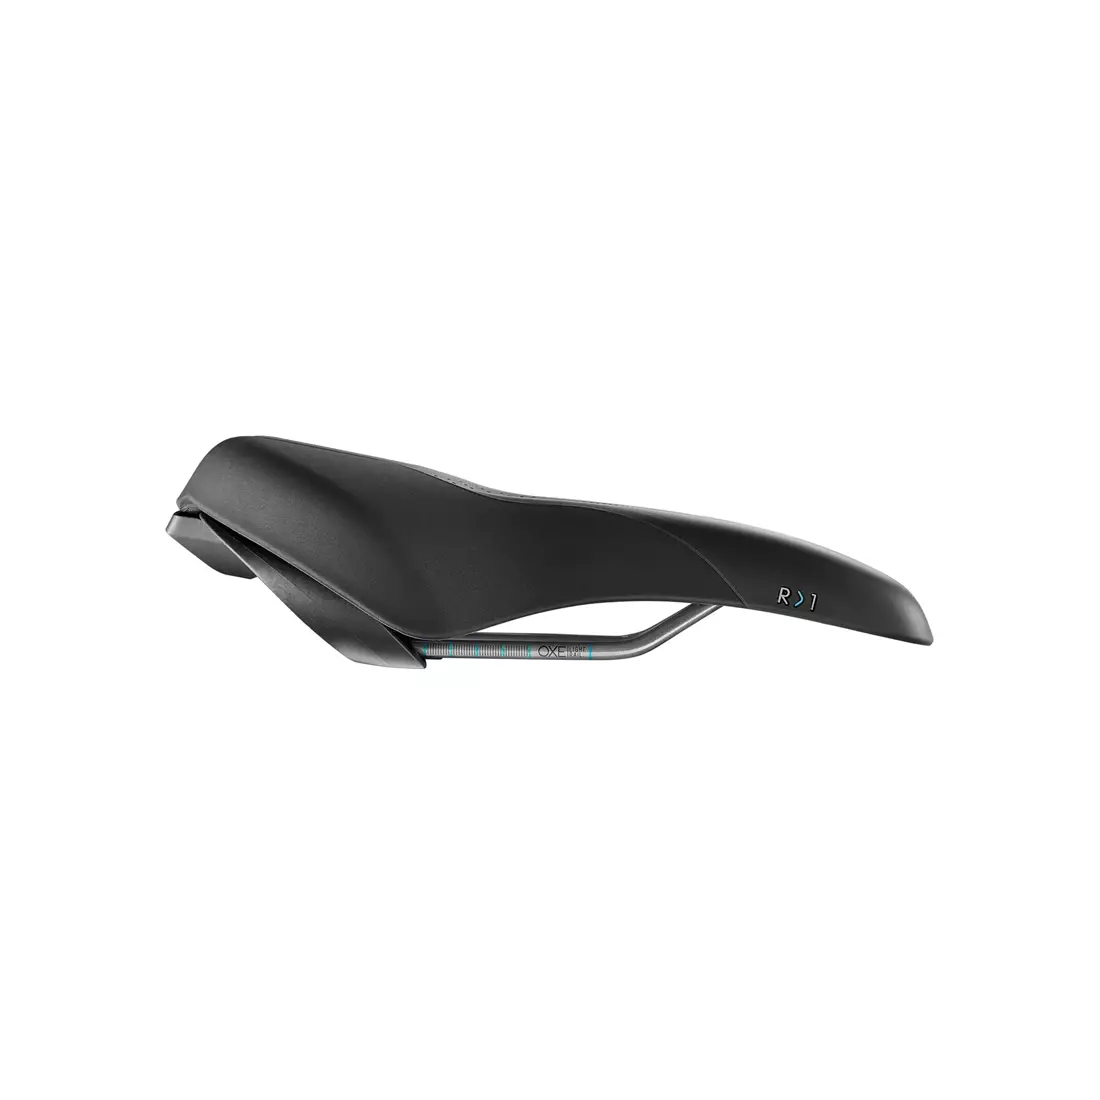 Bicycle saddle SELLEROYAL SCIENTIA RELAXED R1 SMALL 90st. gel + elastomers unisex SR-54R0SB0A09210